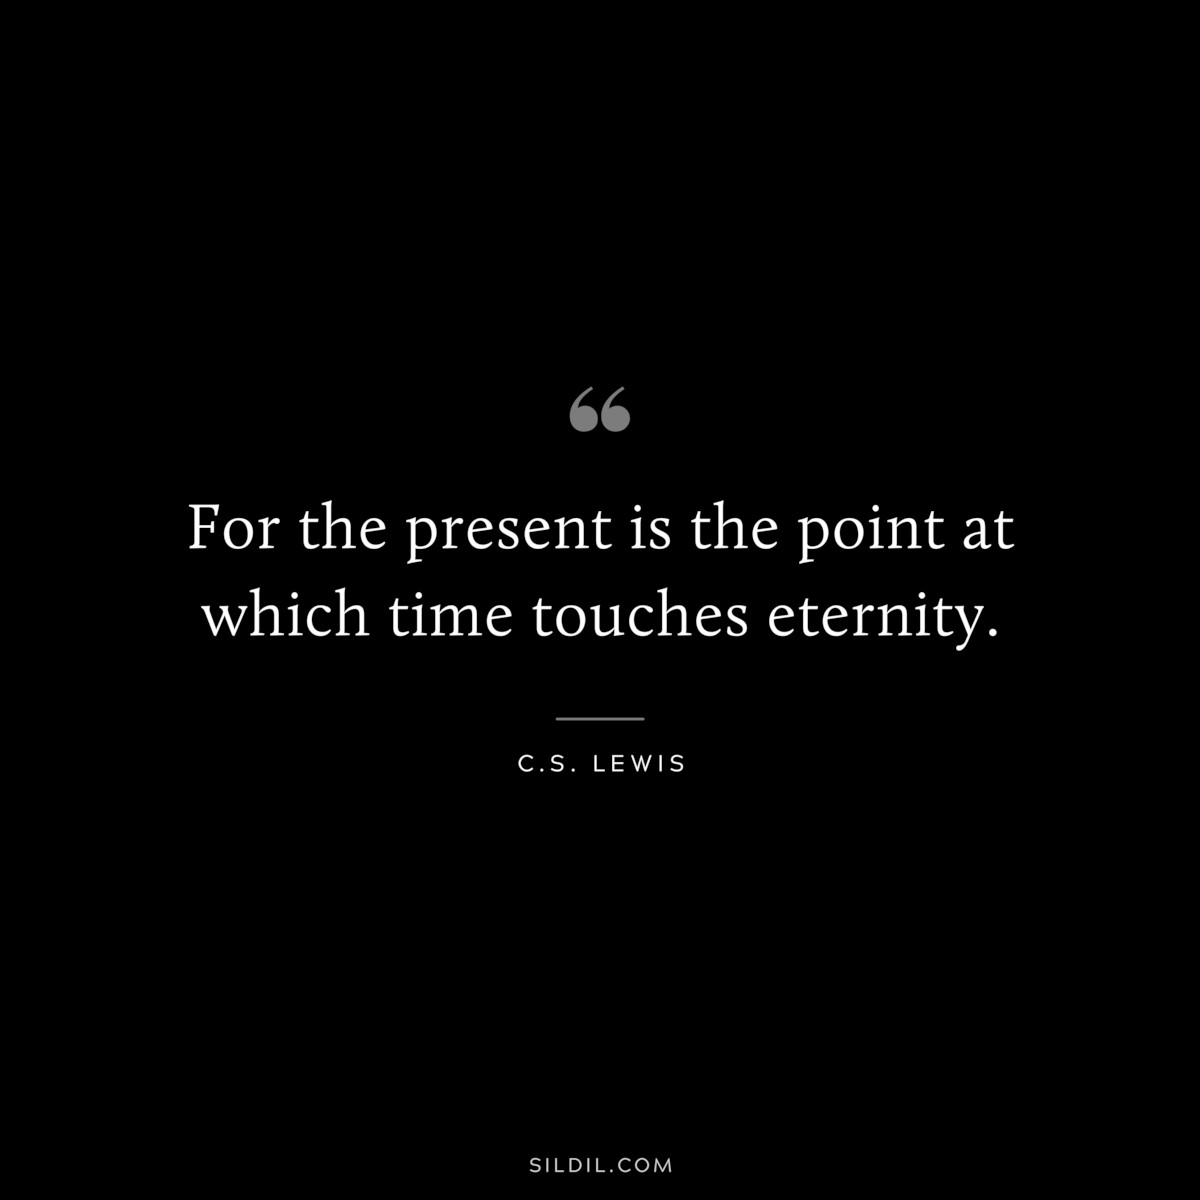 For the present is the point at which time touches eternity. ― C.S. Lewis